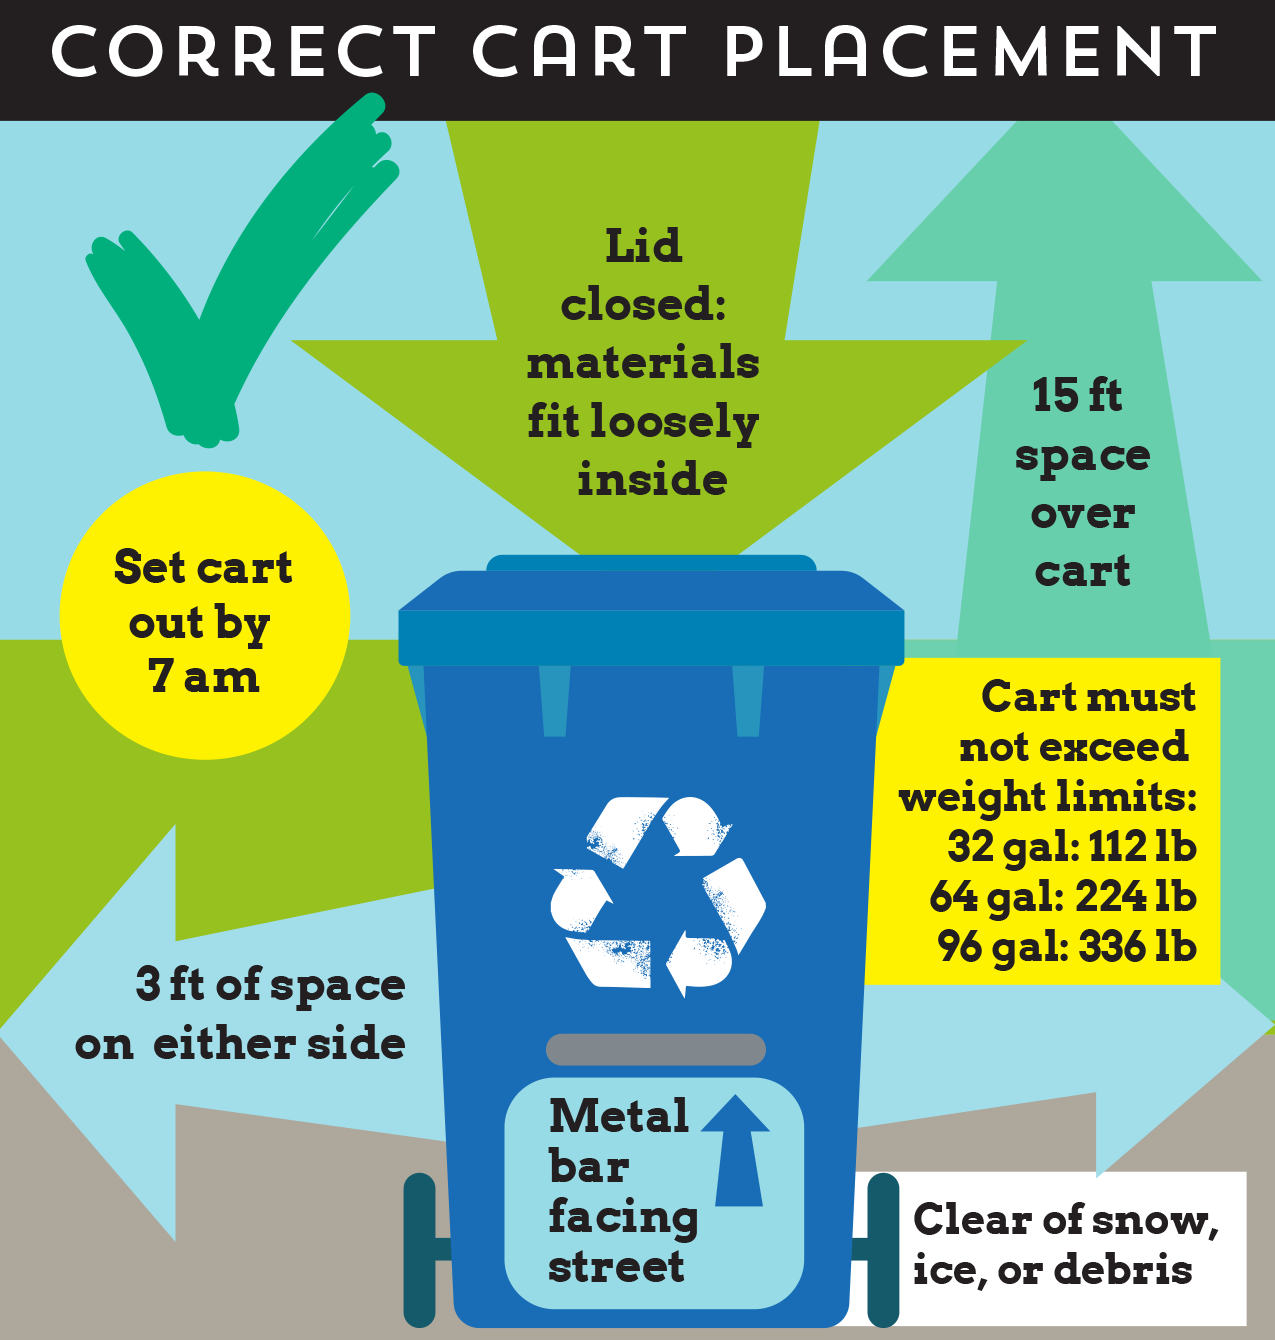 https://www.recycleannarbor.org/sites/default/files/inline-images/Curbside%20Hang%20Tag-Correct%20Cart%20Placement%20Image.png